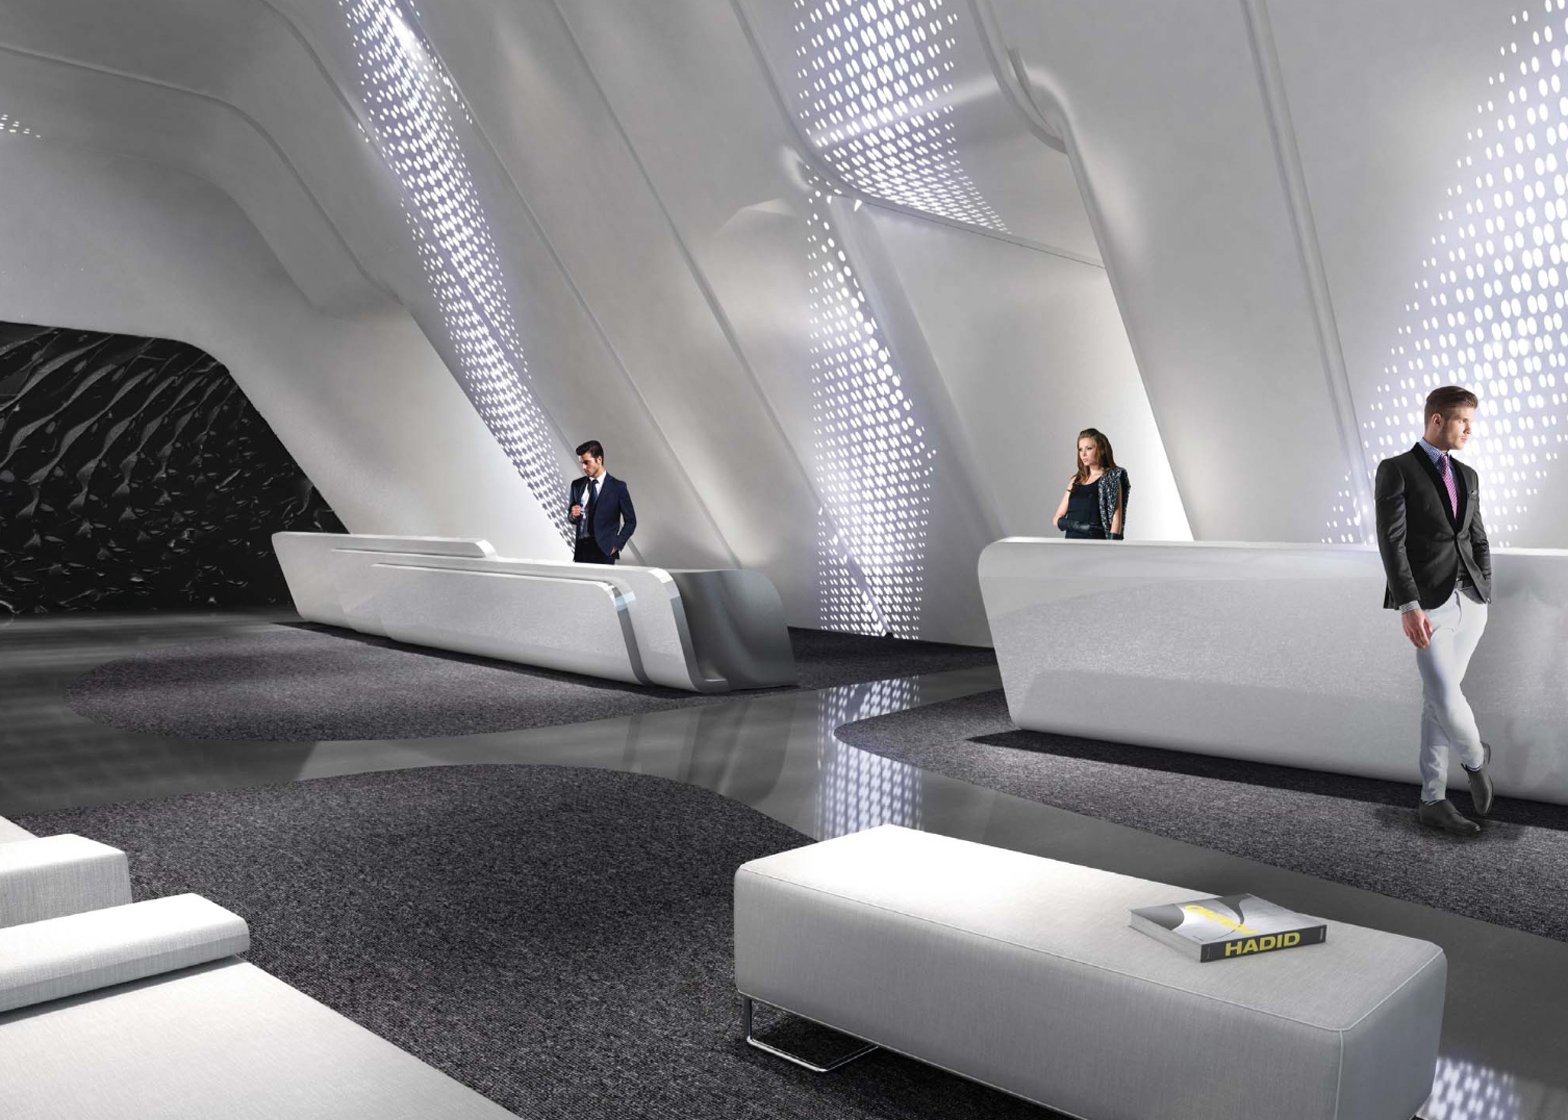 Zaha Hadid's interiors for One Thousand Museum in Miami